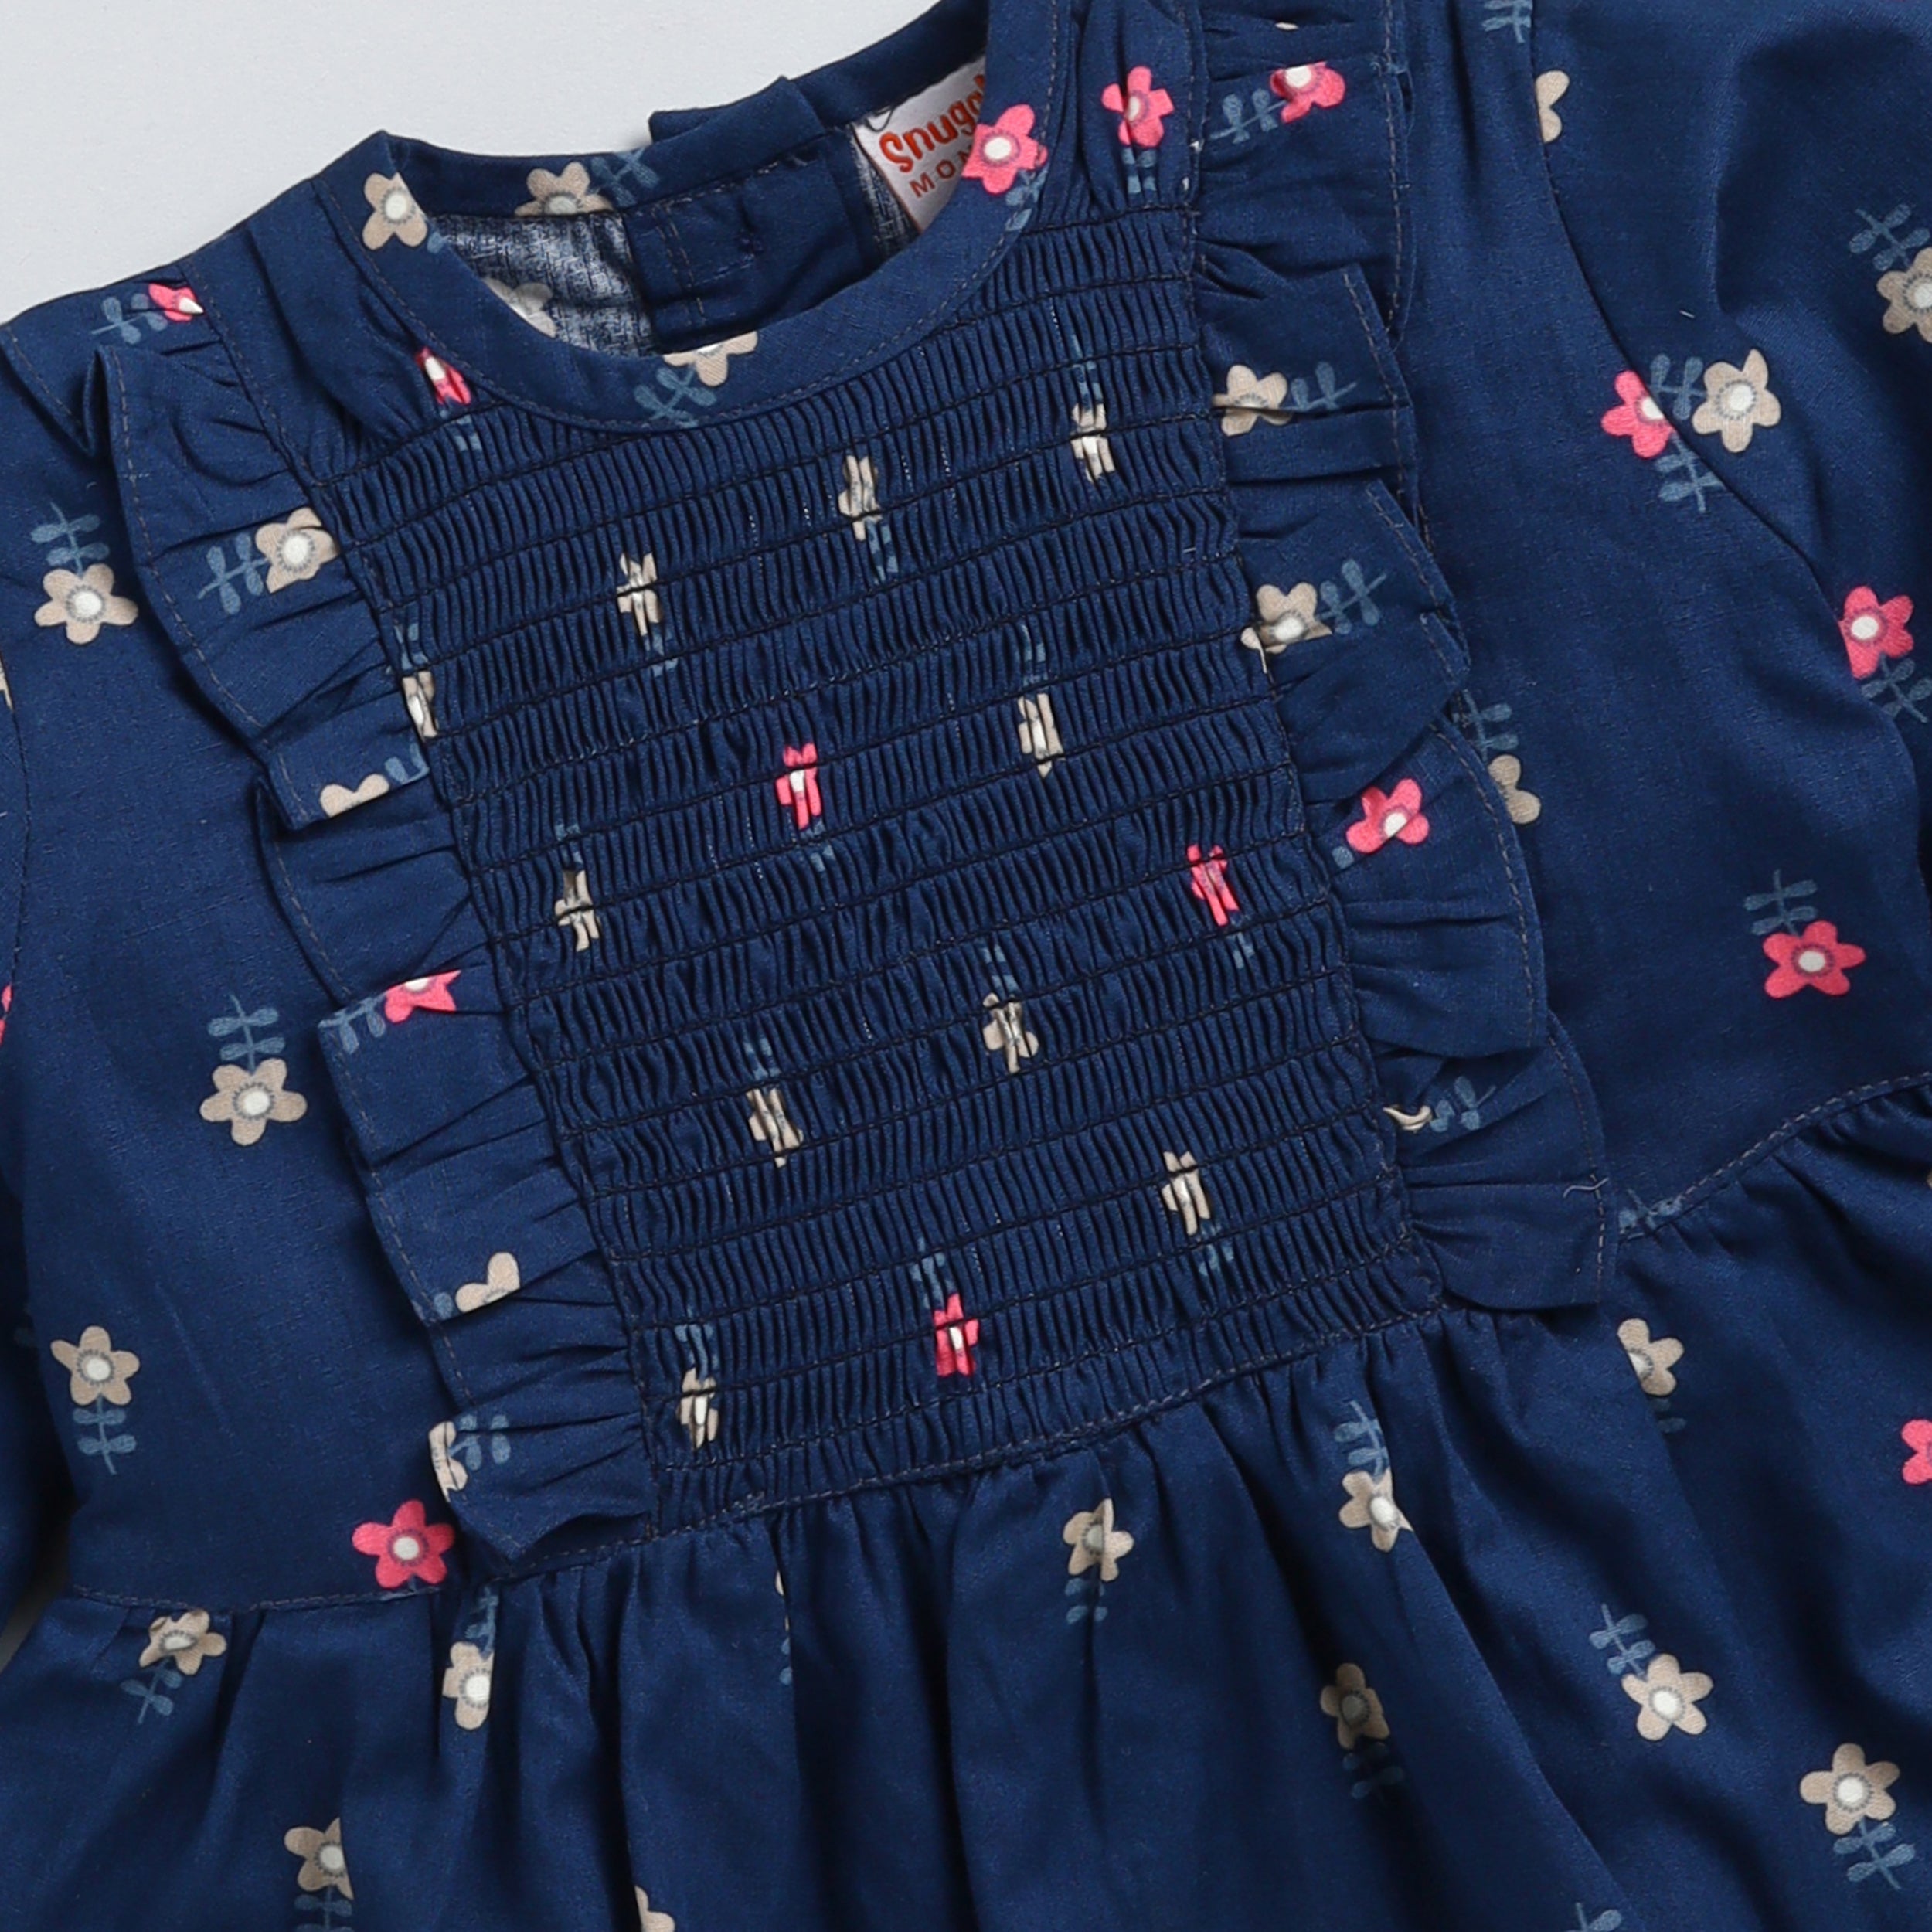 Snuggly Monkey Flower Aop Full-Sleeves Woven Smocking Frock